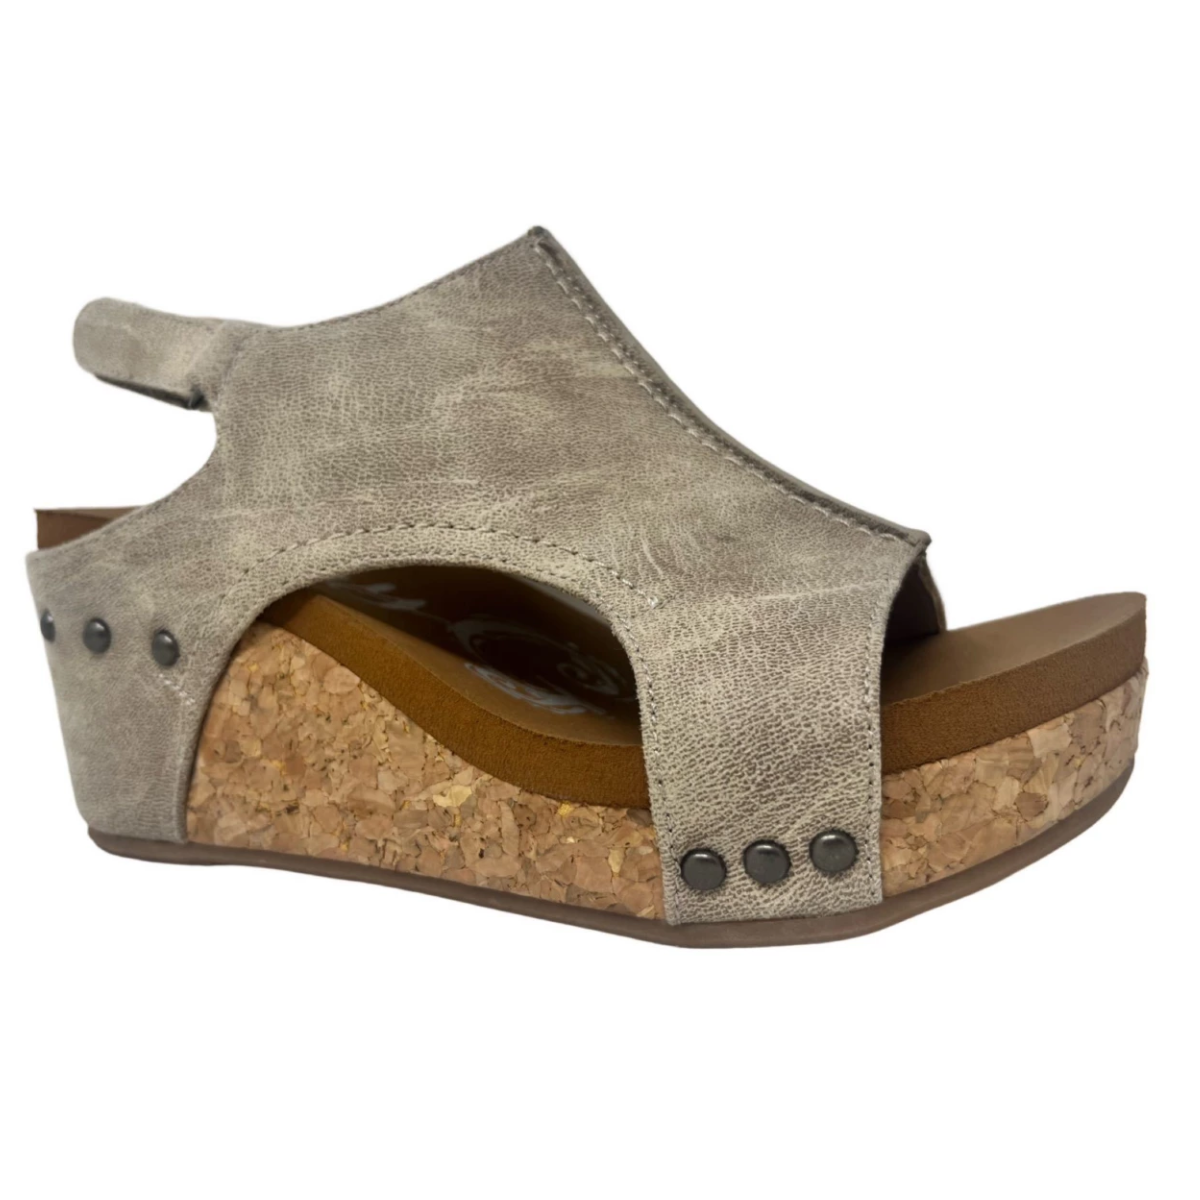 A close up of the Liberty Wedge in Cream, a comfortable wedge sandal by VERY G, featuring a velcro strap.